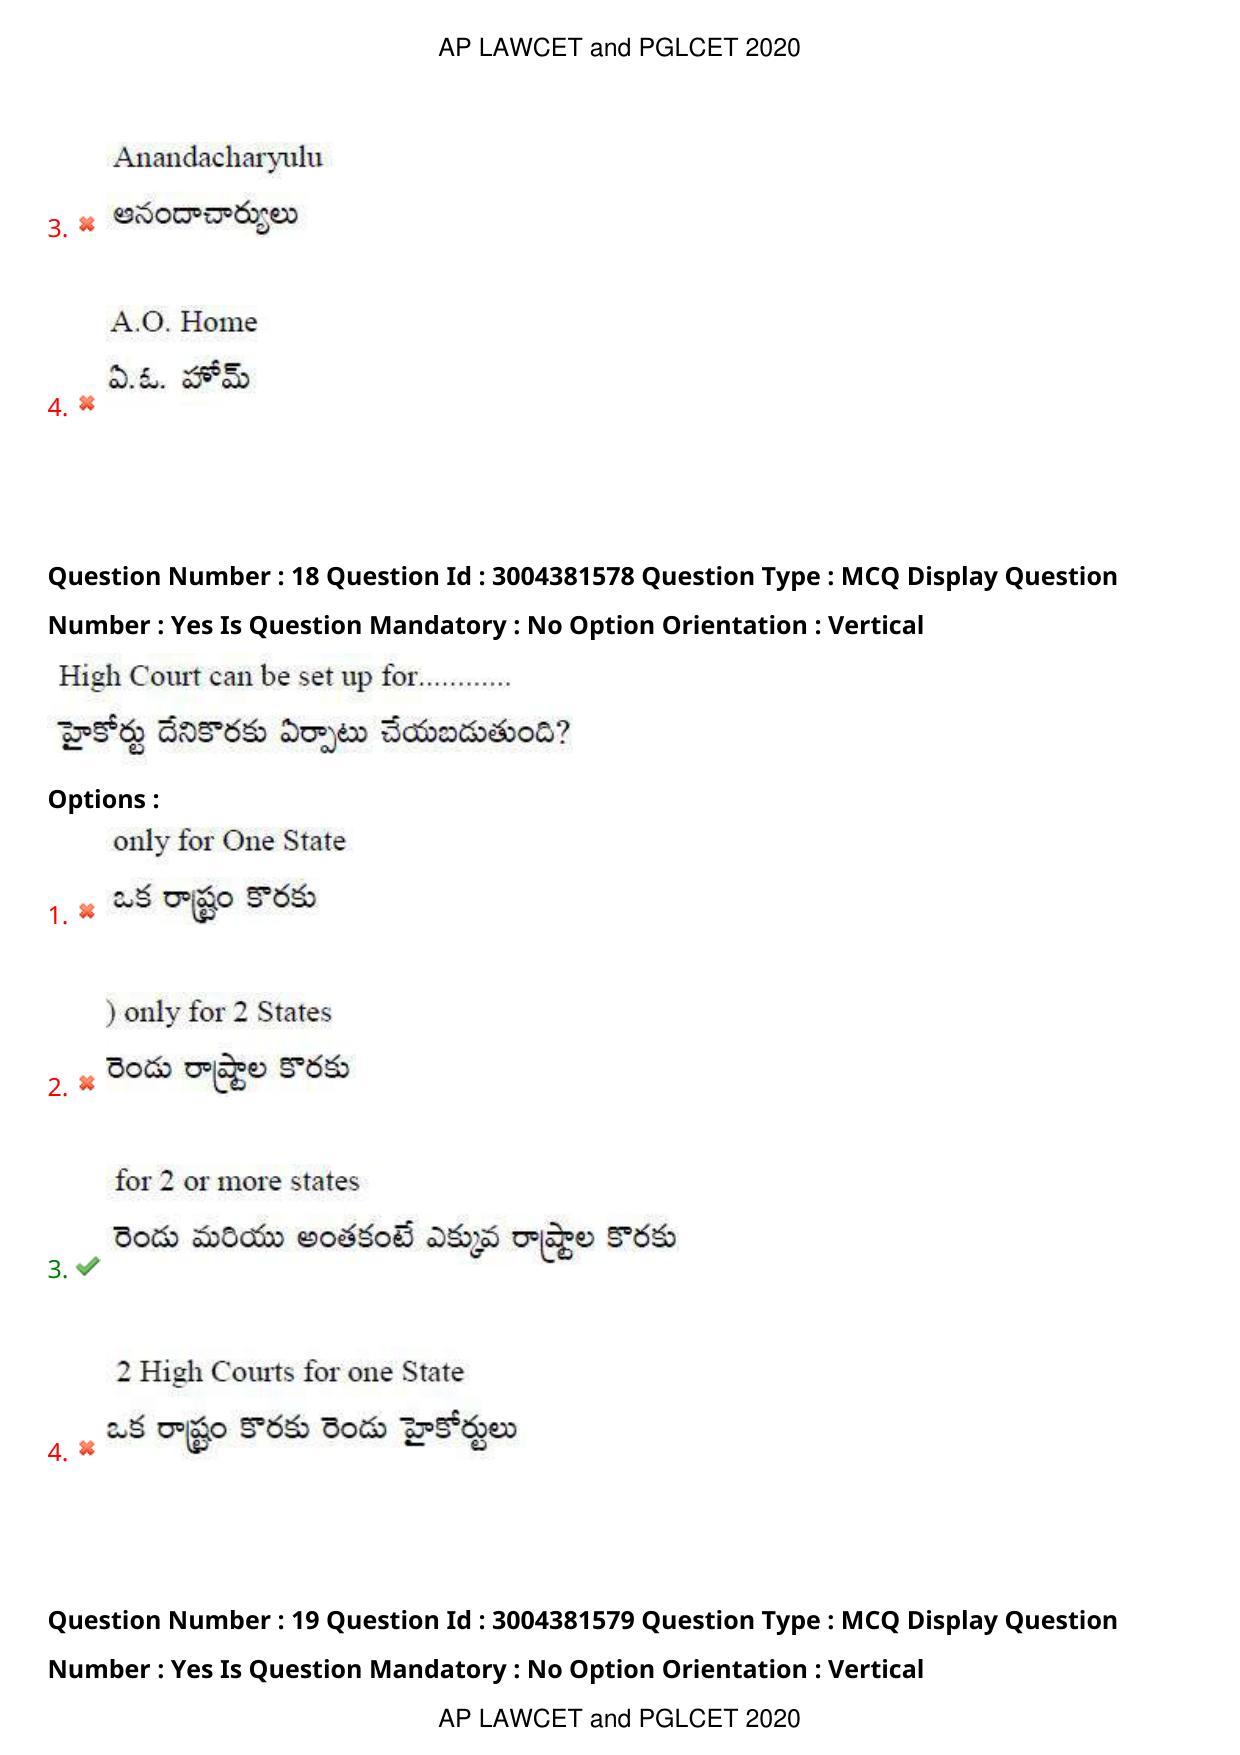 AP LAWCET 2020 - 5 Year LLB Question Paper With Keys - Page 12